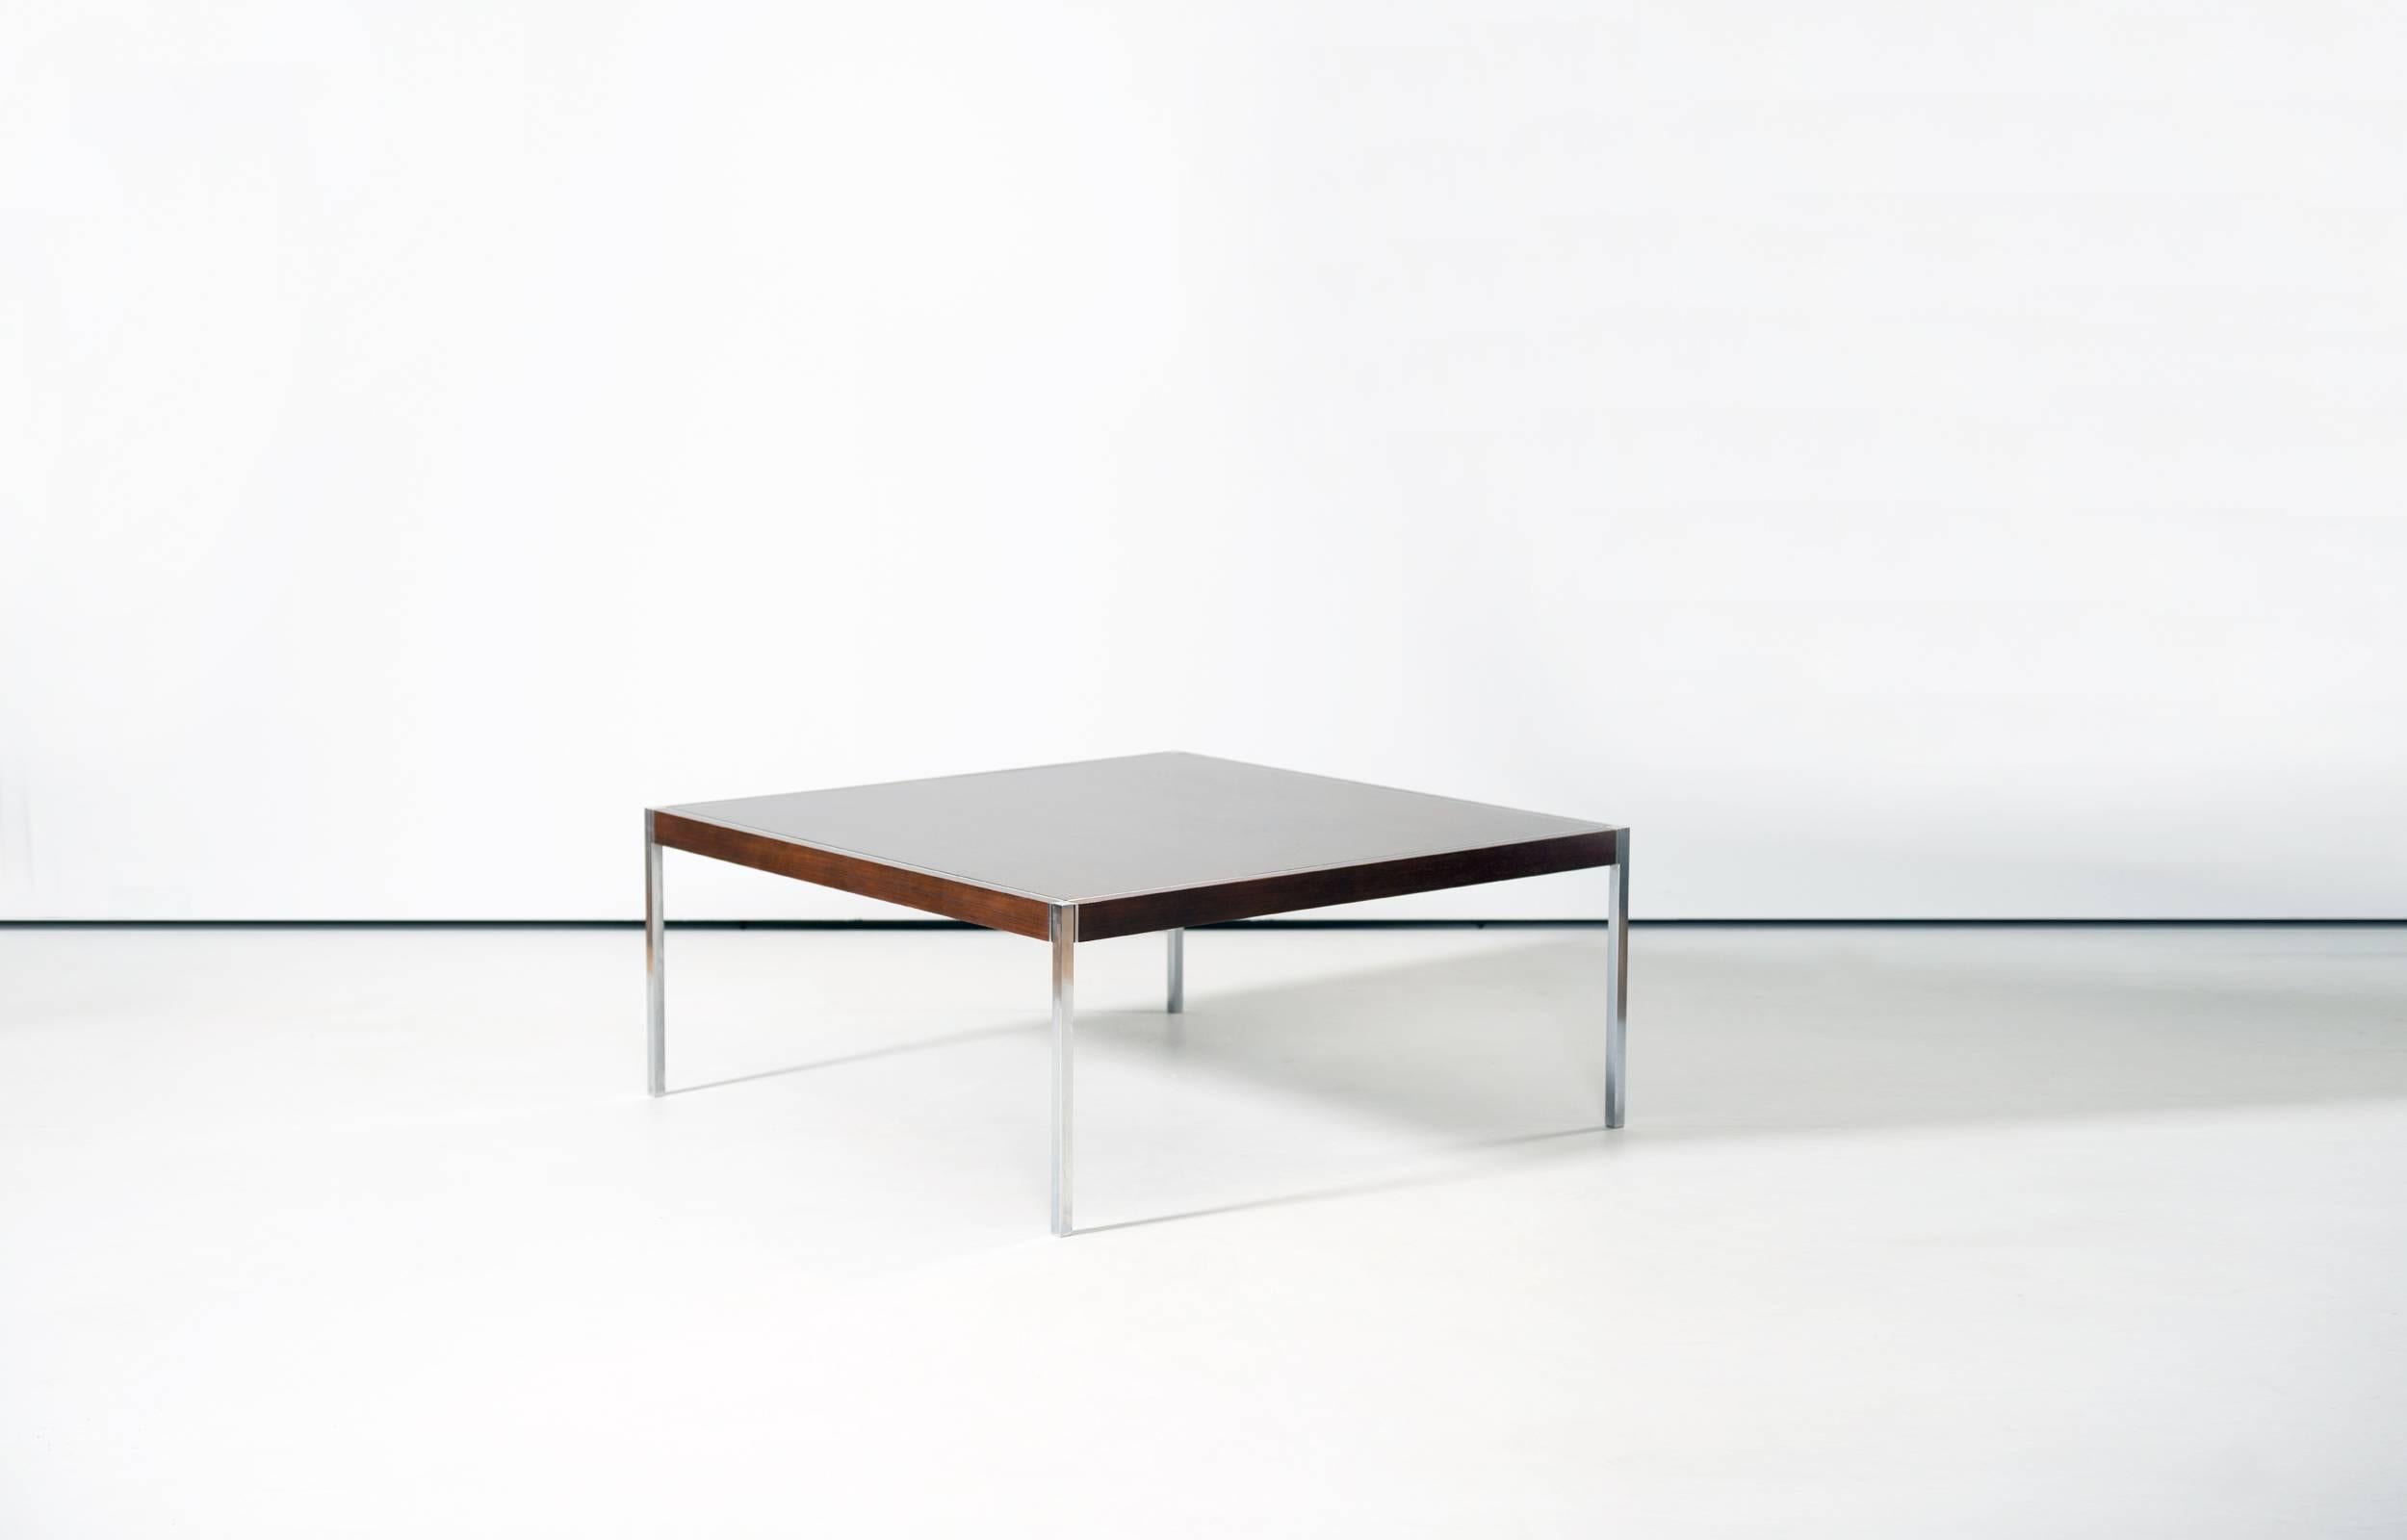 Large coffee table designed by Richard Schultz and produced by Knol Int. in the 1960s. Solid steel frame or legs and original lacquered rosewood veneered top. Labled with Knoll silver sticker and paper label. 

Very good or perfect vintage